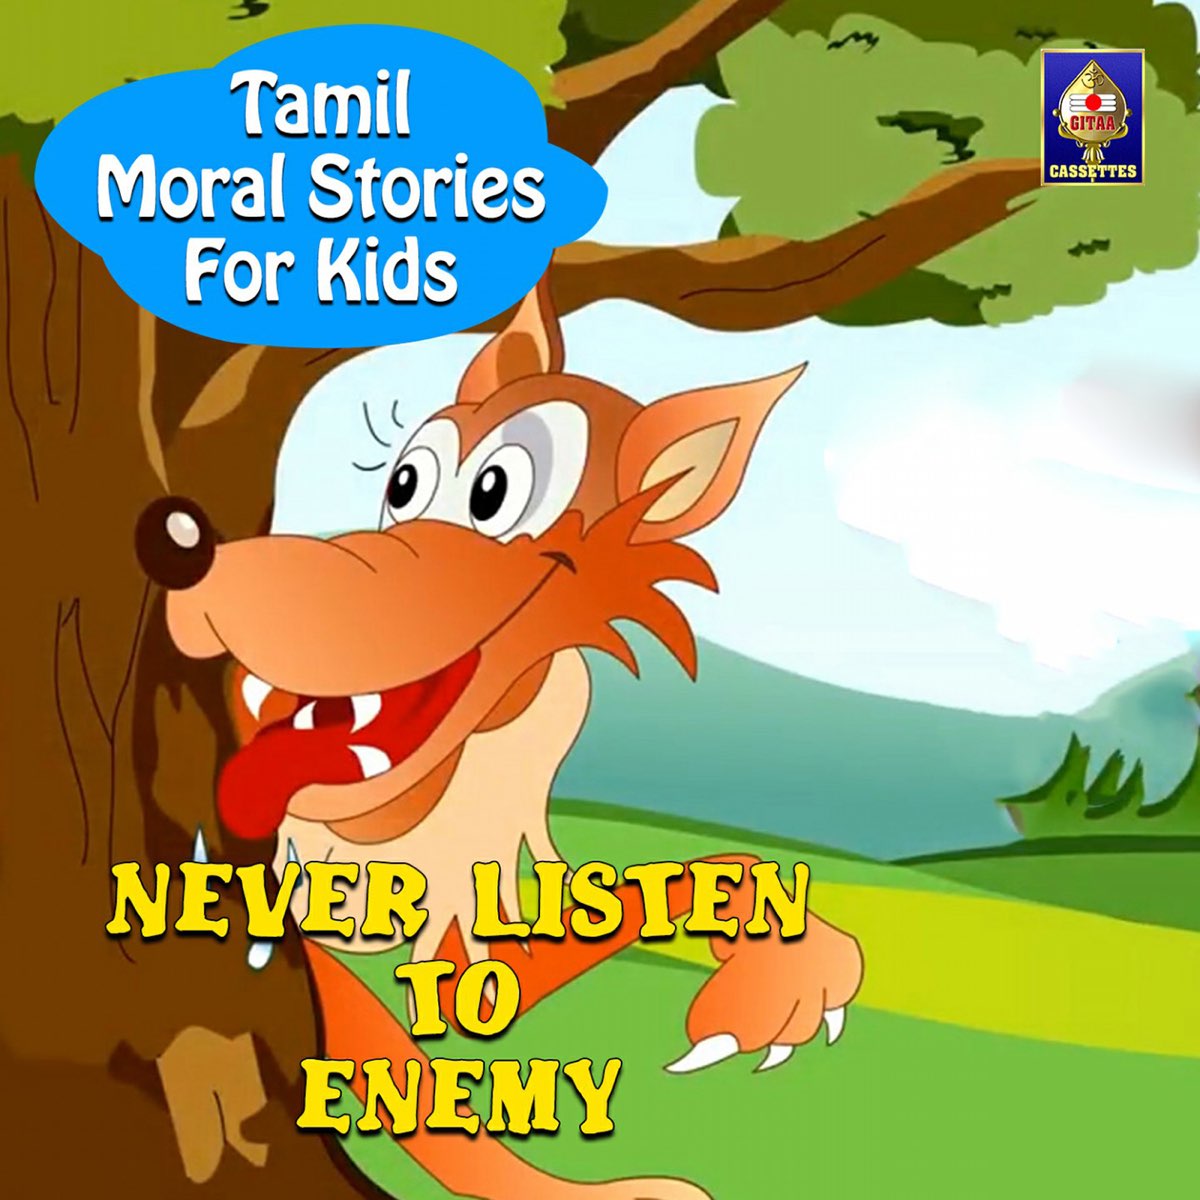 Tamil Moral Stories For Kids - Never Listen To Enemy - Single by Rajesh  Kumar C on Apple Music